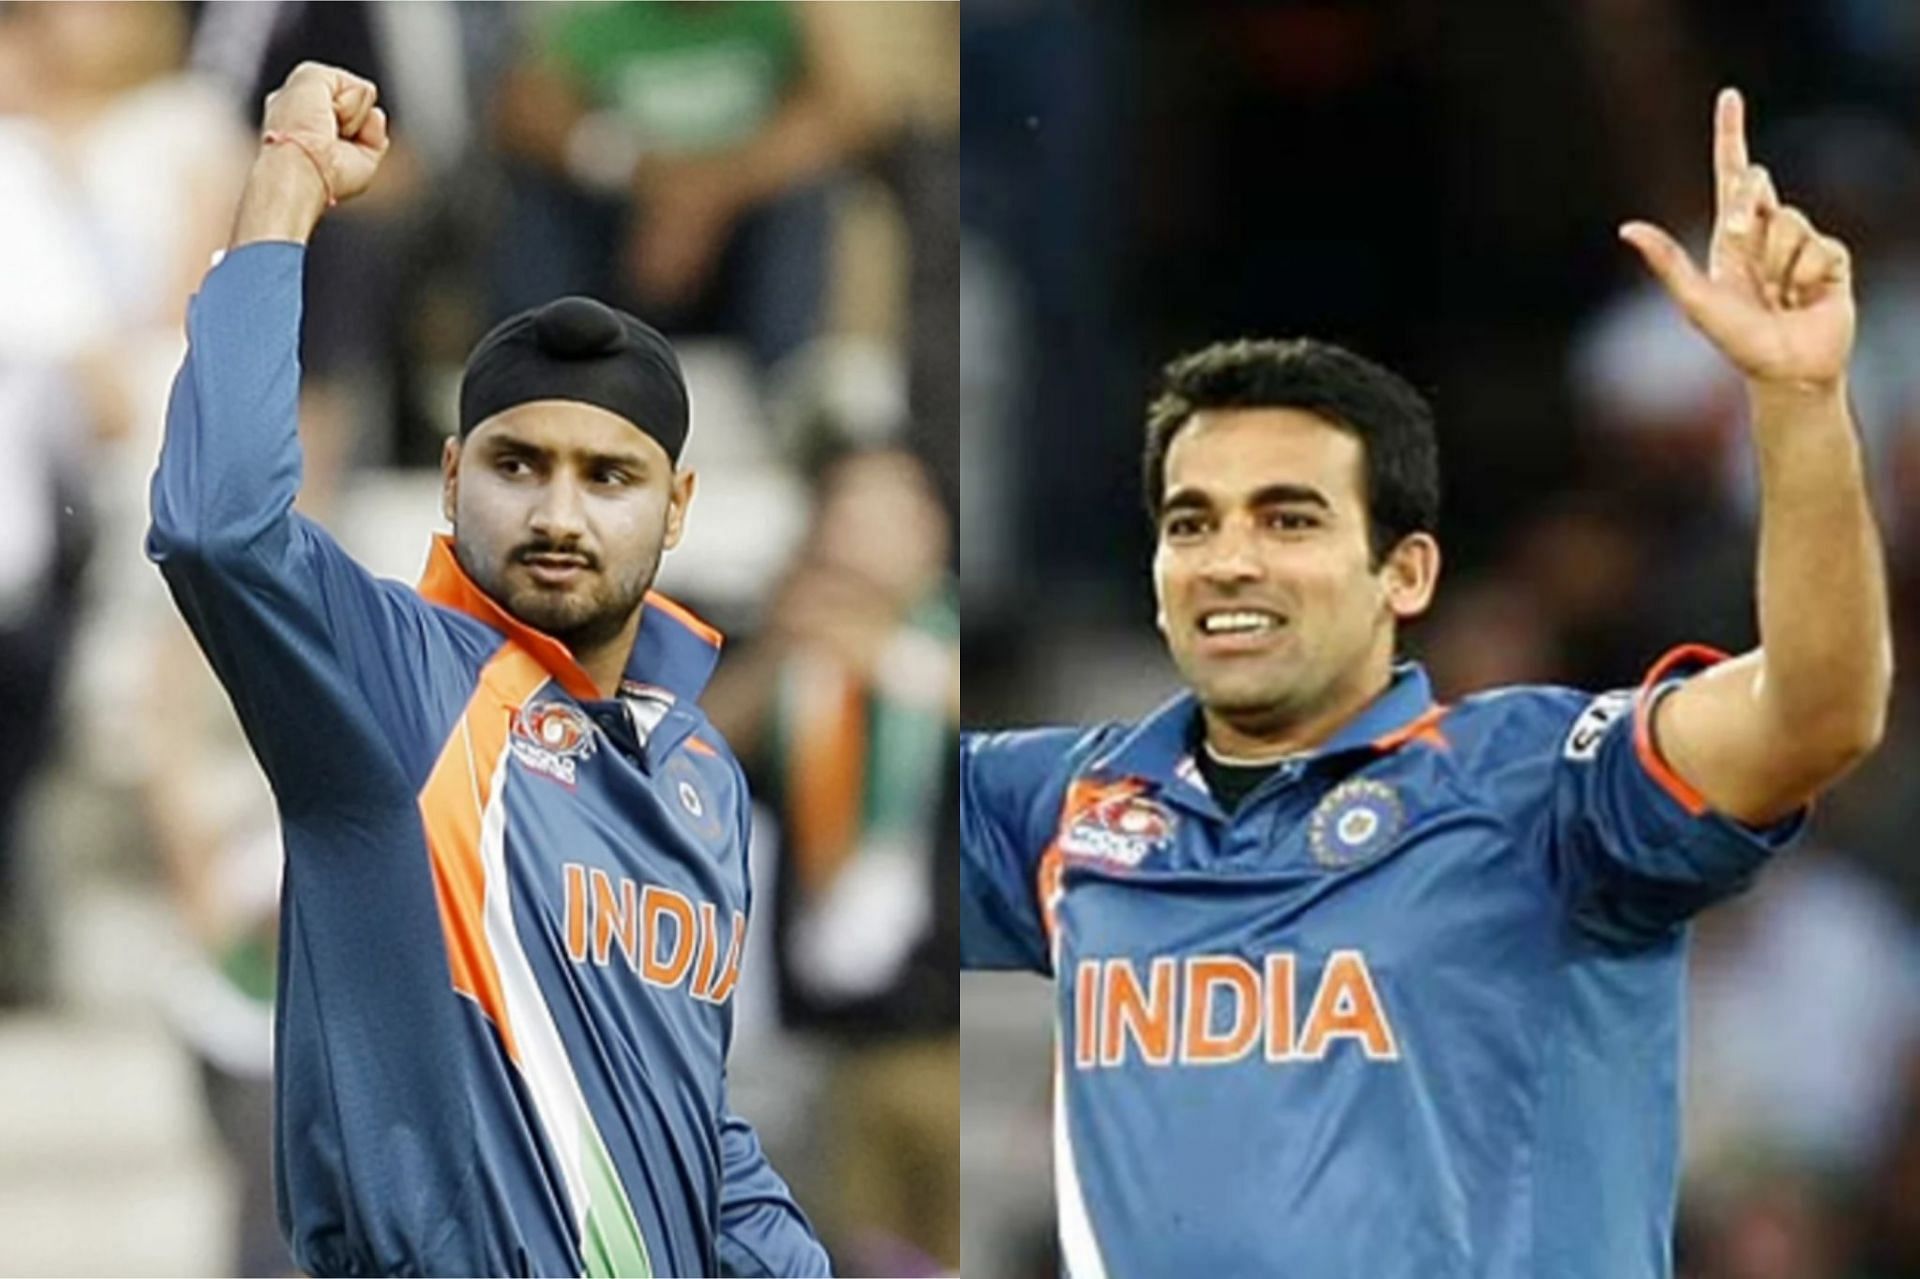 Harbhajan Singh and Zaheer Khan - The two Indian legends [Getty Images]